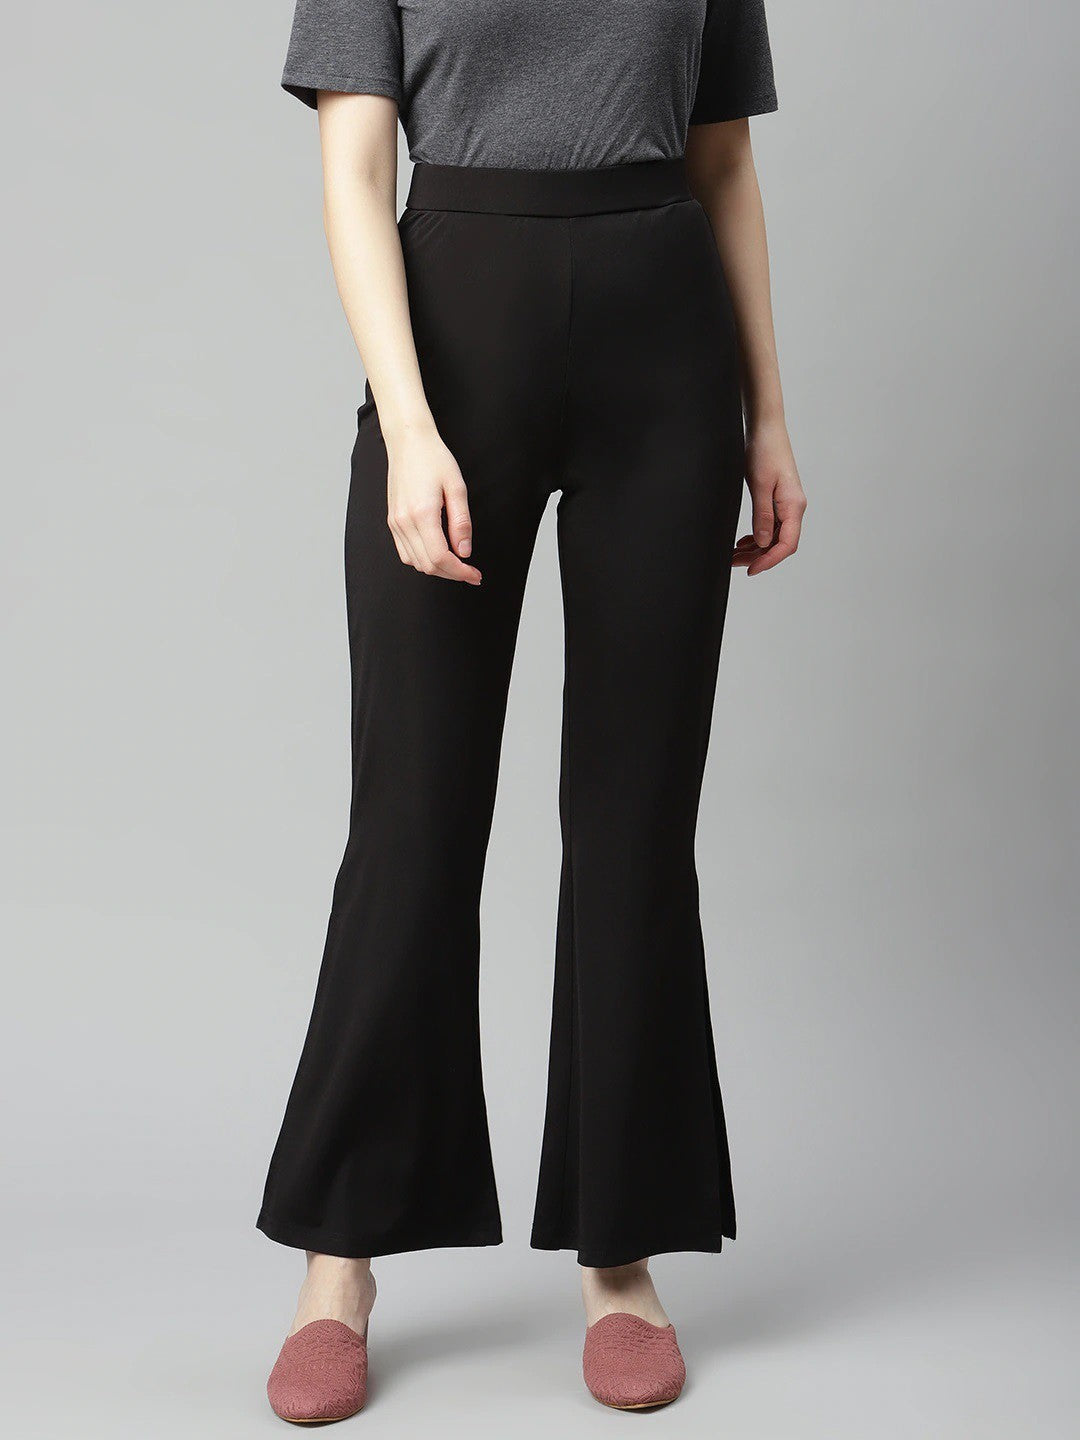 Black Solid Bootcut Trousers